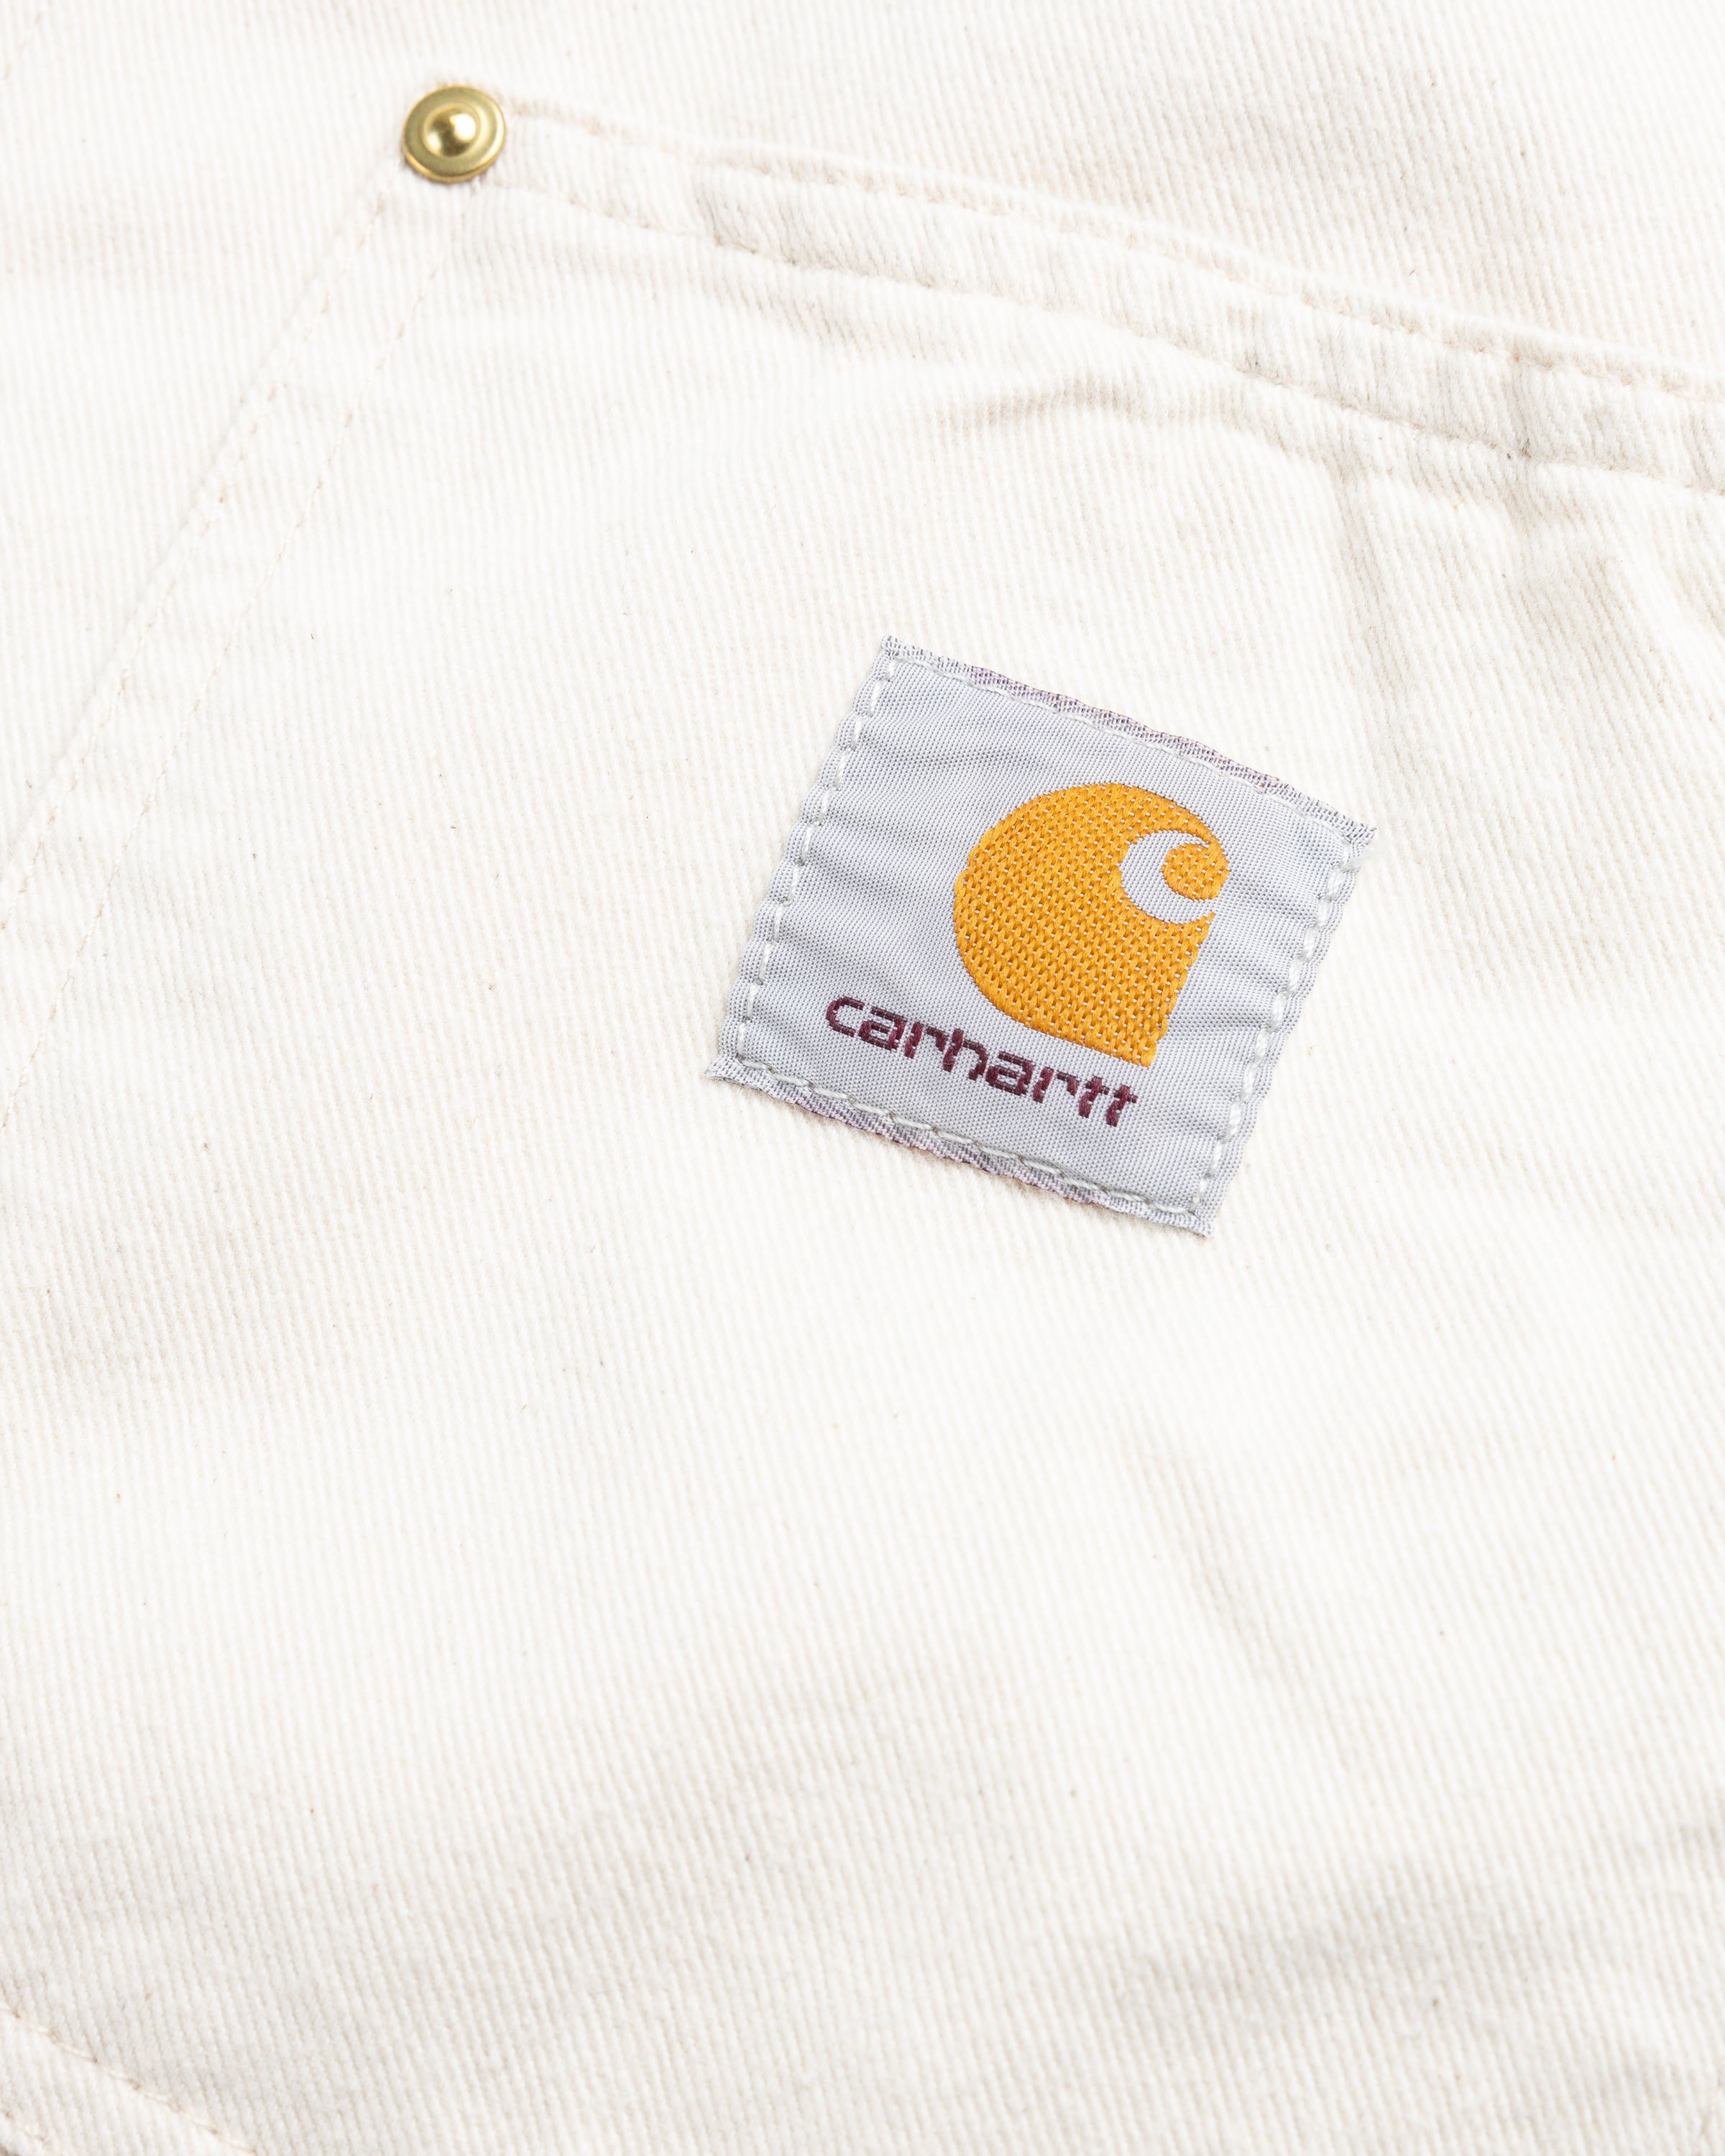 Carhartt WIP - Derby Shirt Jacket Natural - Clothing - White - Image 6